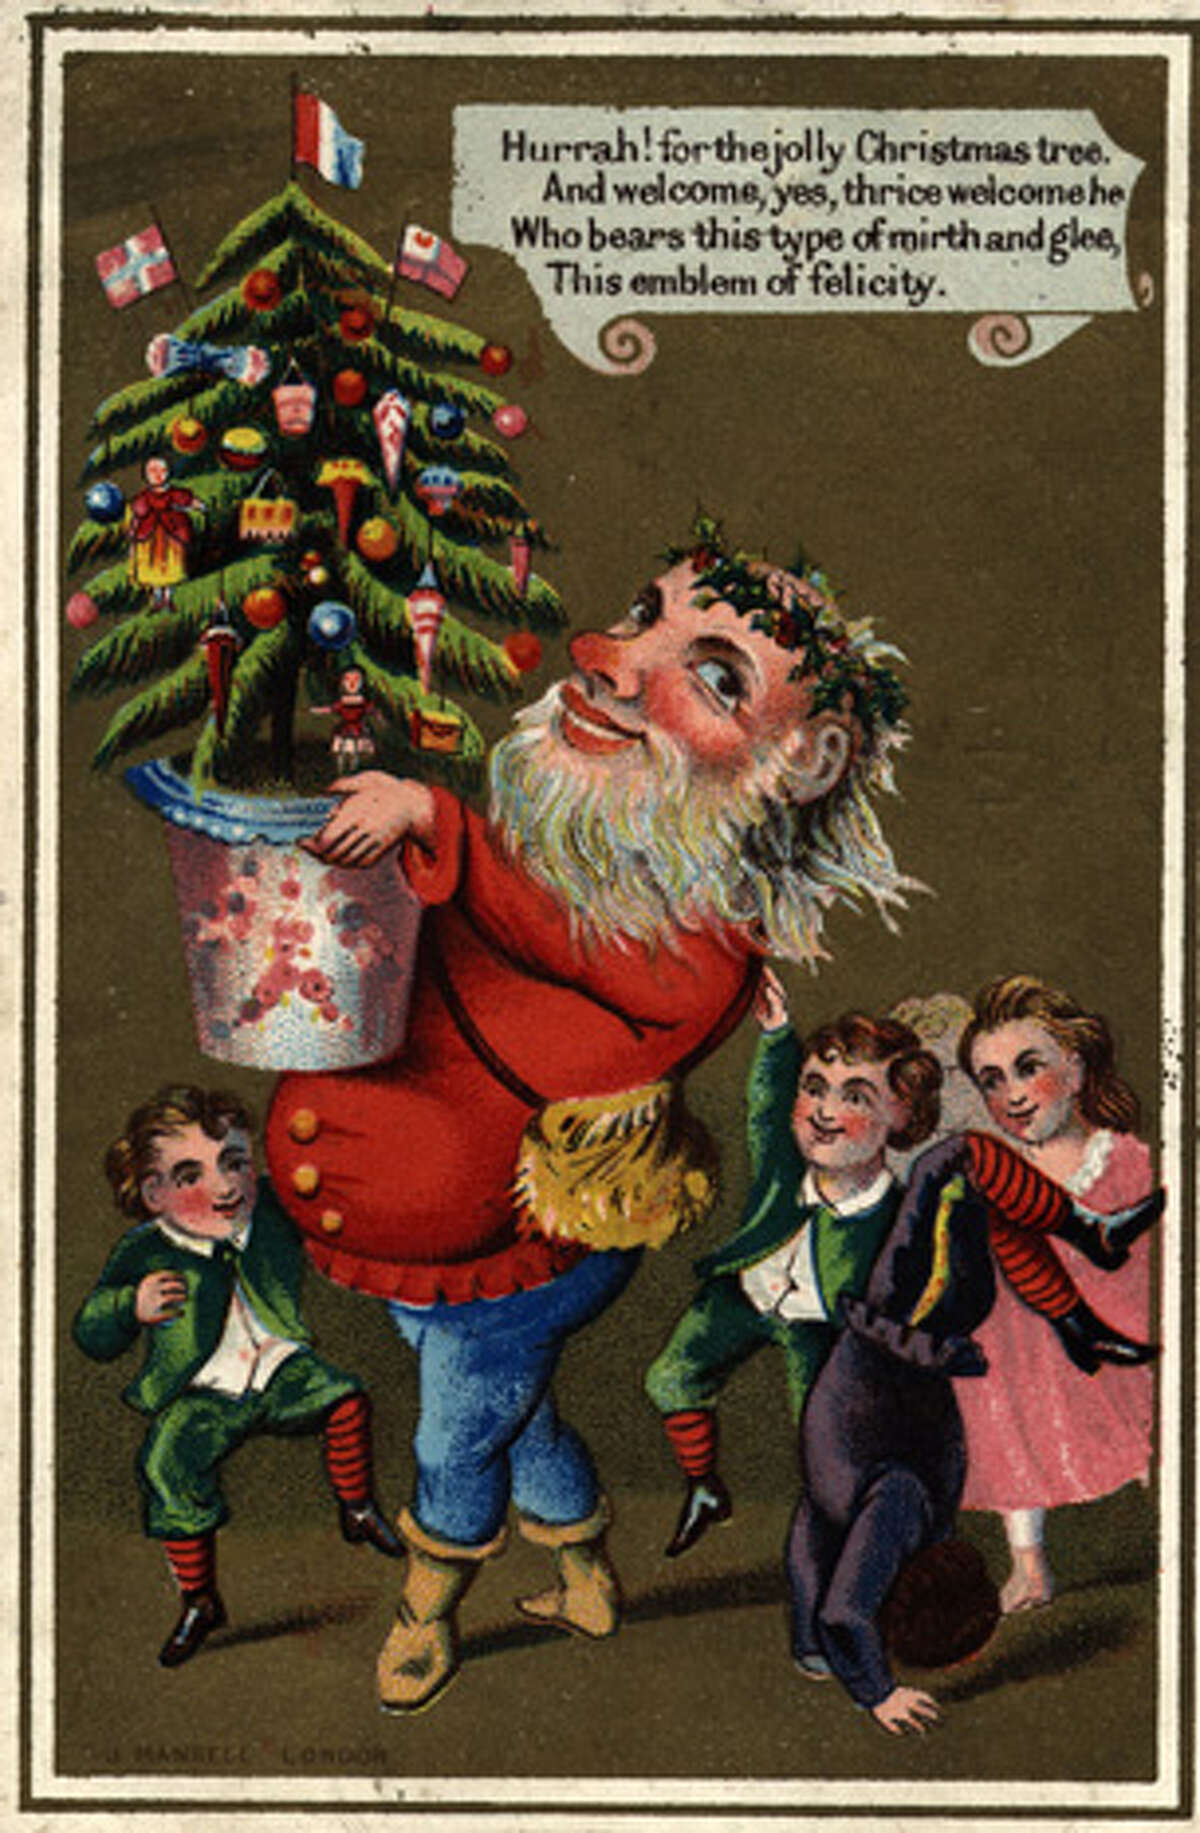 Circa 1885: Father Christmas arrives with a Christmas tree to the delight of the children in this Victorian greetings card. J Mansell (Photo by Hulton Archive/Getty Images)